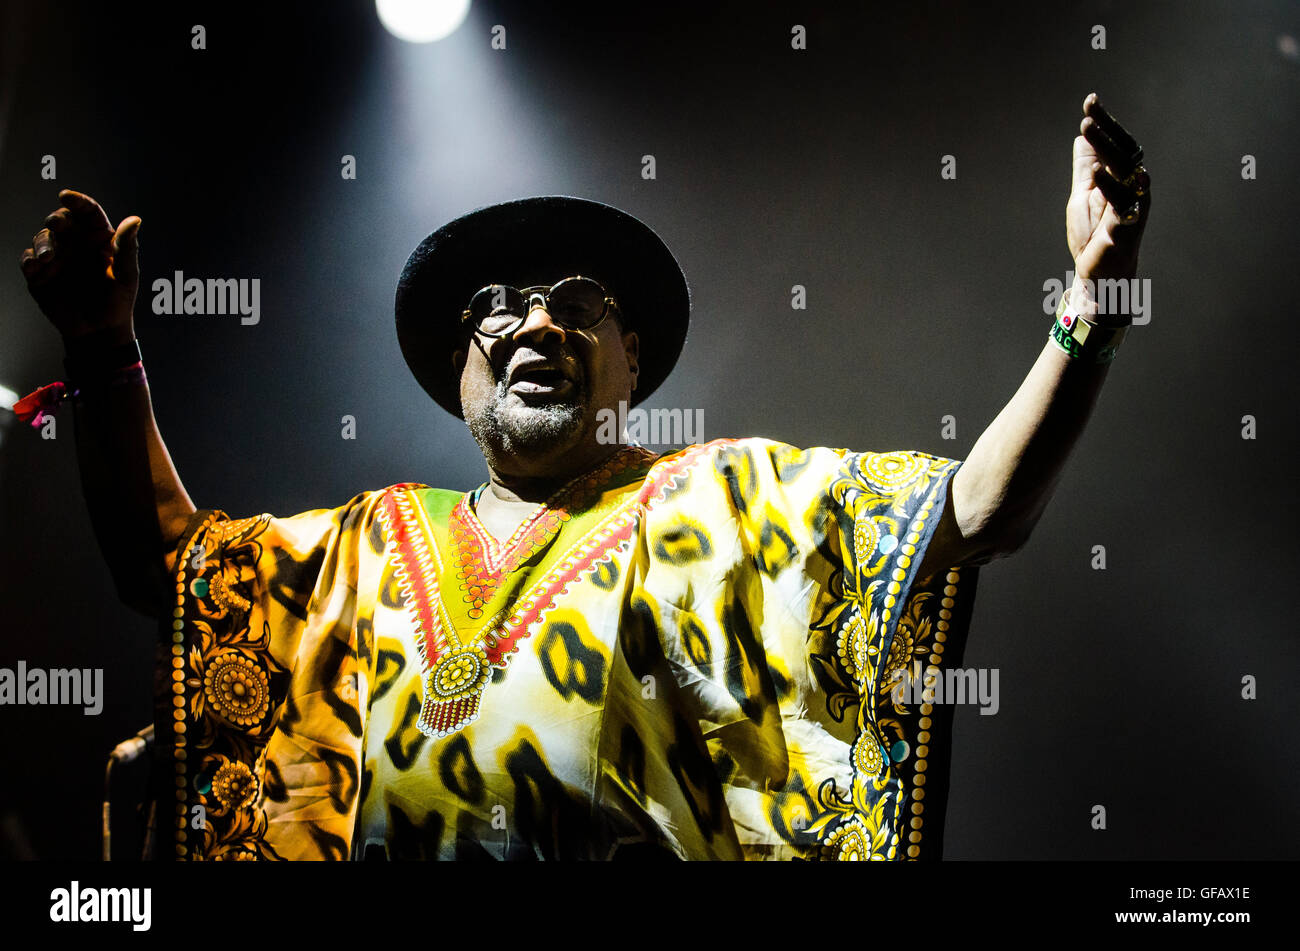 Charlton Park, Wiltshire, UK. 30th July, 2016. George Clinton Parliament Funkadelic headline the Open Air Stage at WOMAD festival. Credit:  Francesca Moore/Alamy Live News Stock Photo